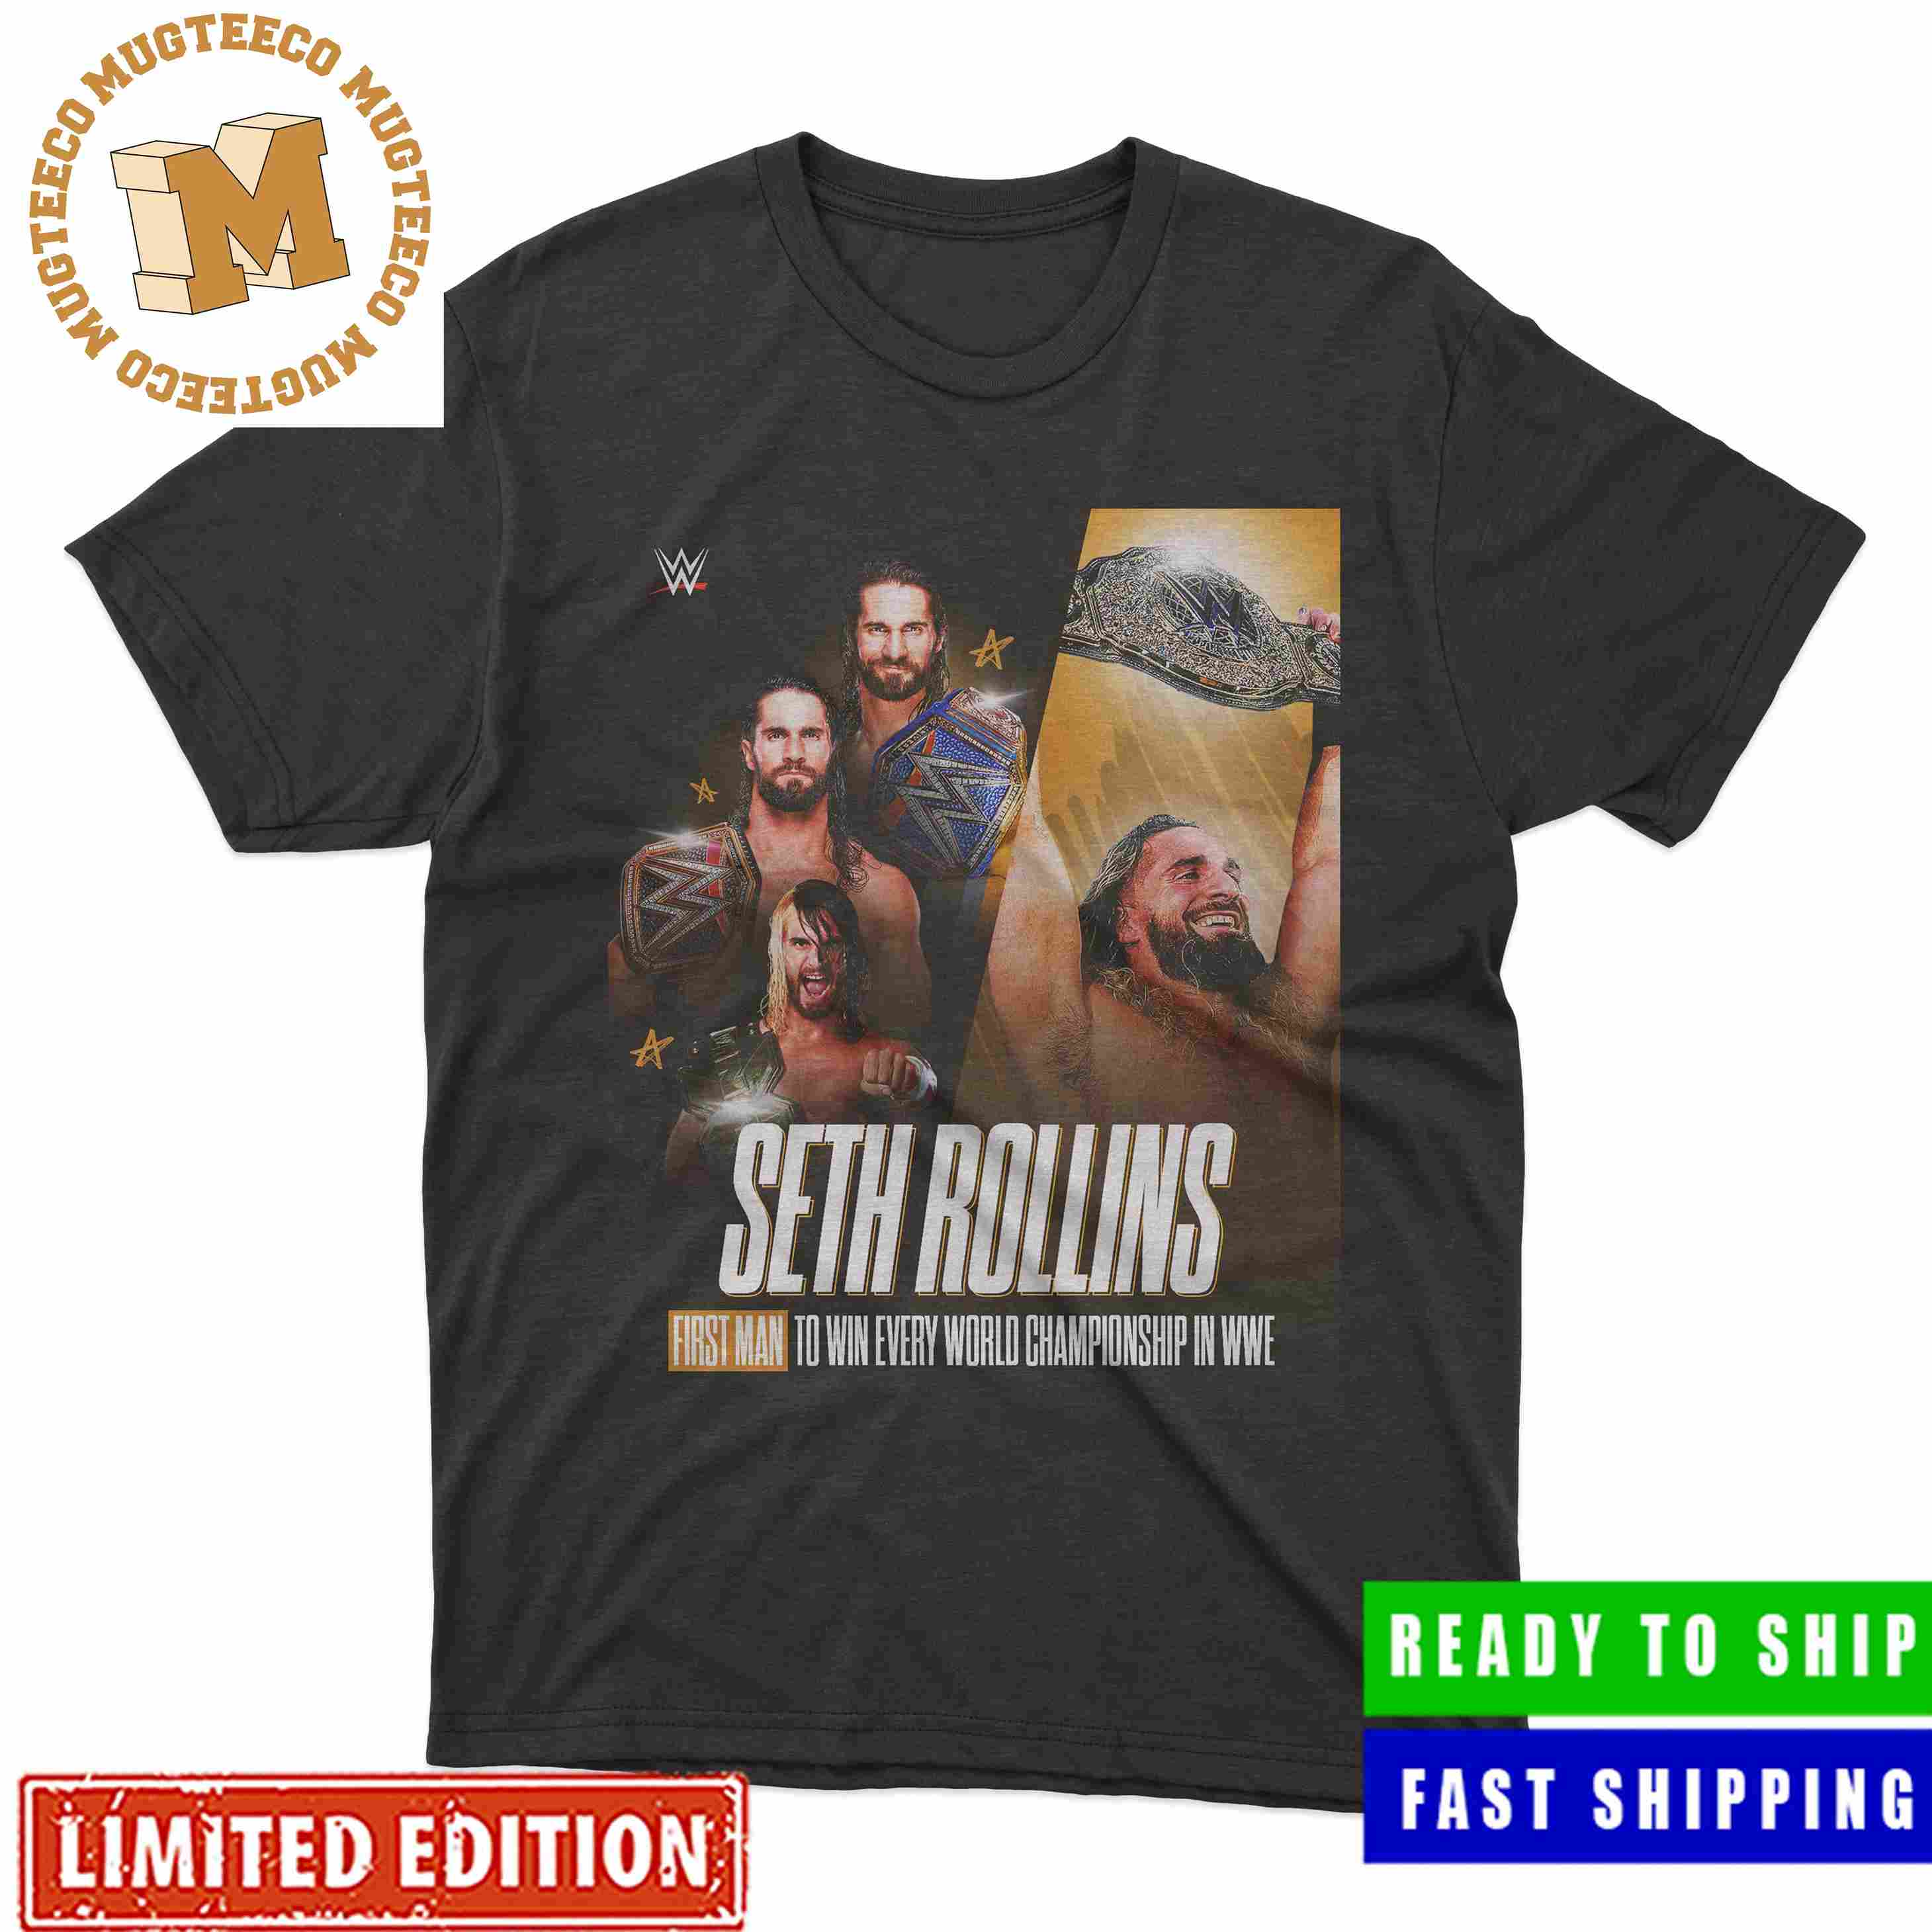 Seth Rollins First Man To Win Every World Championship In WWE Unisex T-Shirt